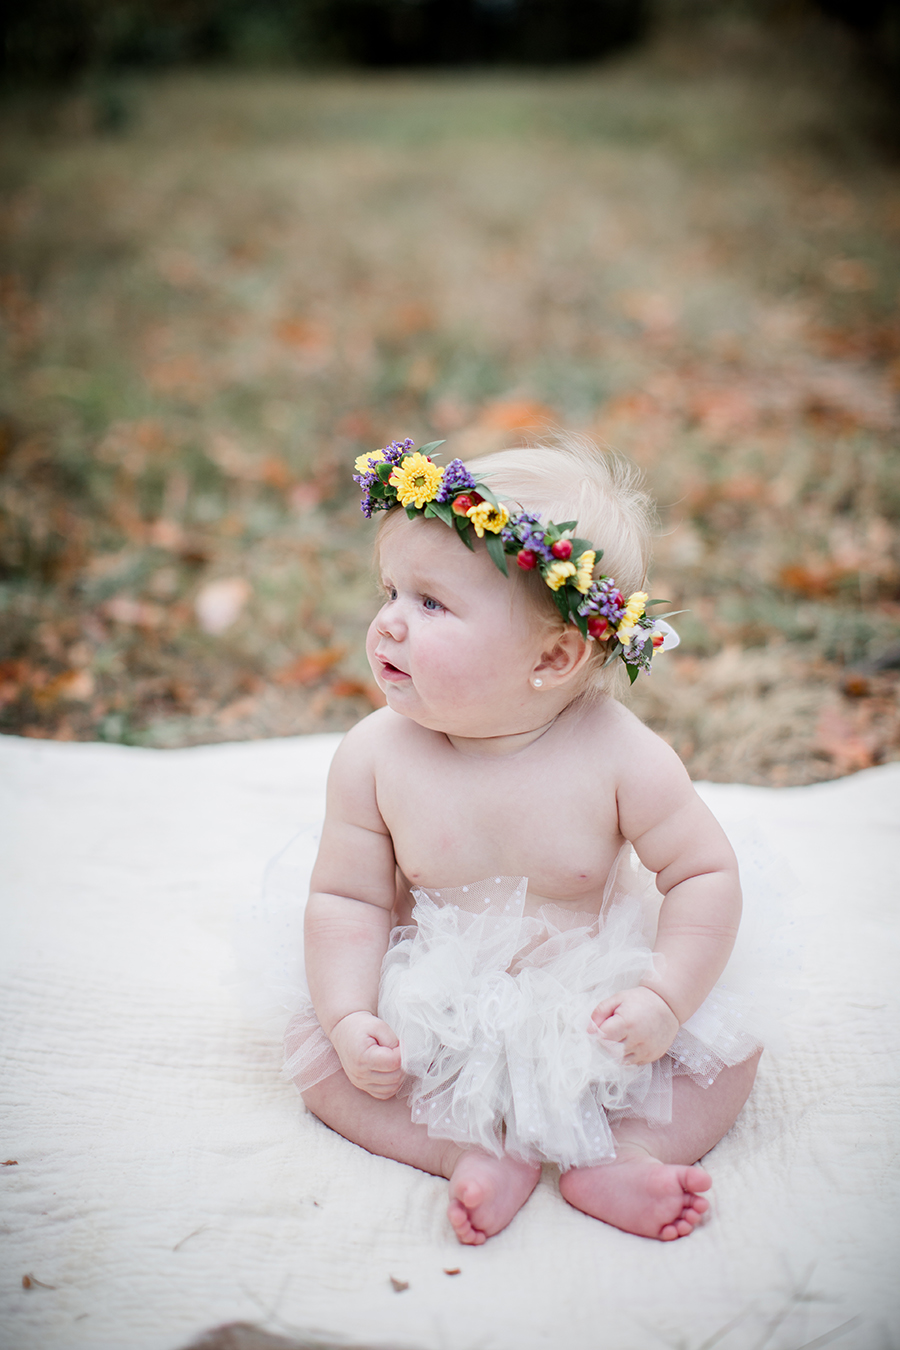 Flower crown and tutu by Knoxville Wedding Photographer, Amanda May Photos.